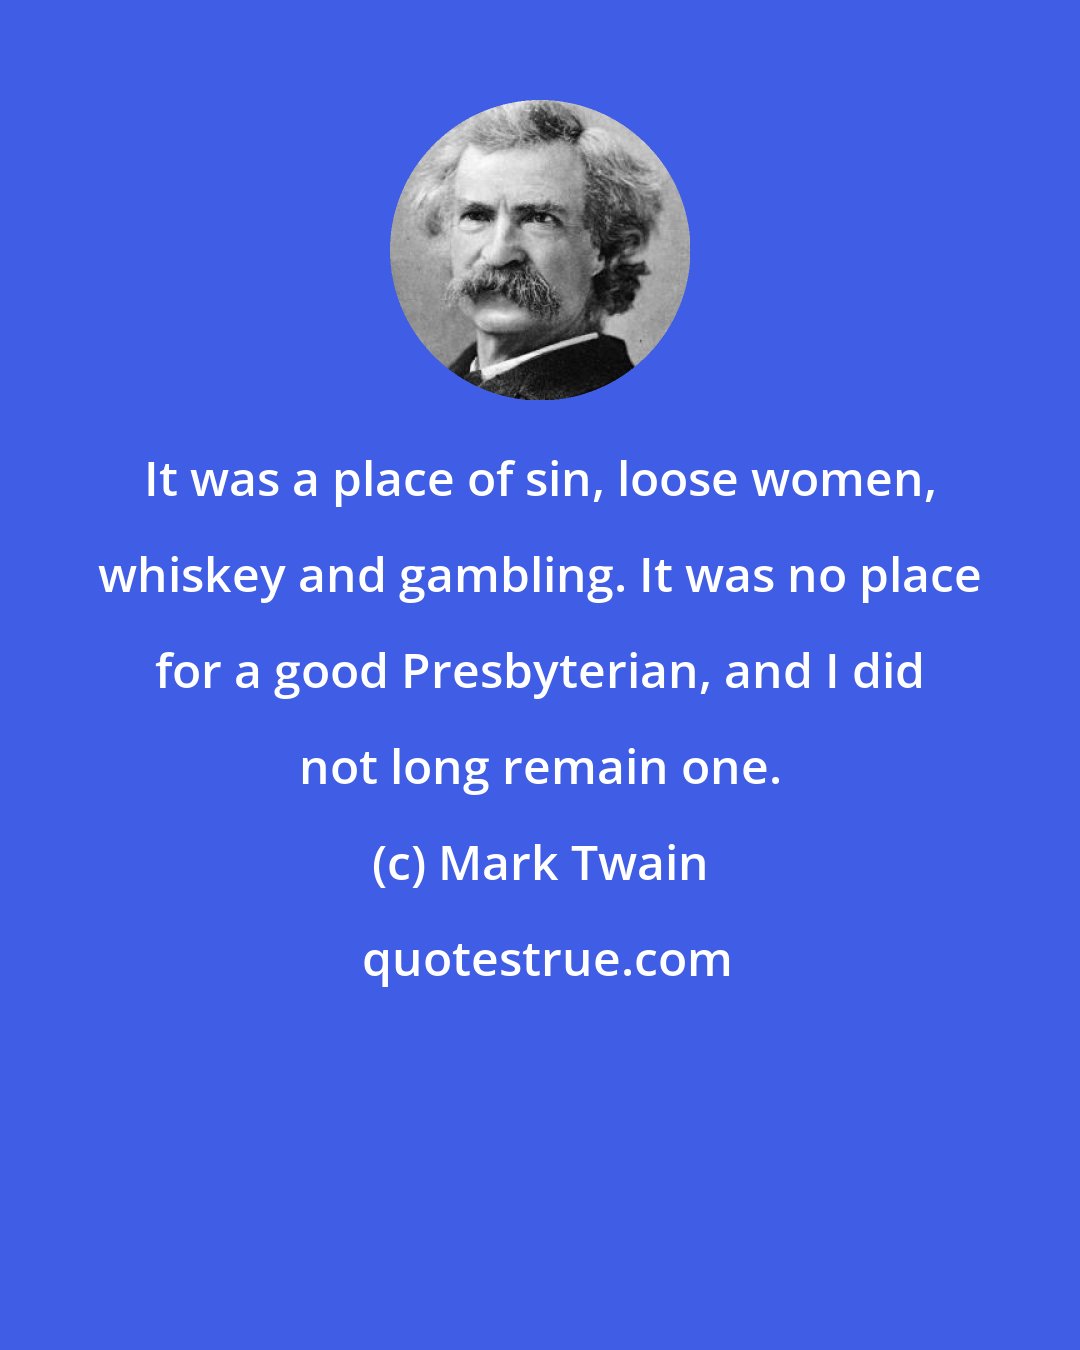 Mark Twain: It was a place of sin, loose women, whiskey and gambling. It was no place for a good Presbyterian, and I did not long remain one.